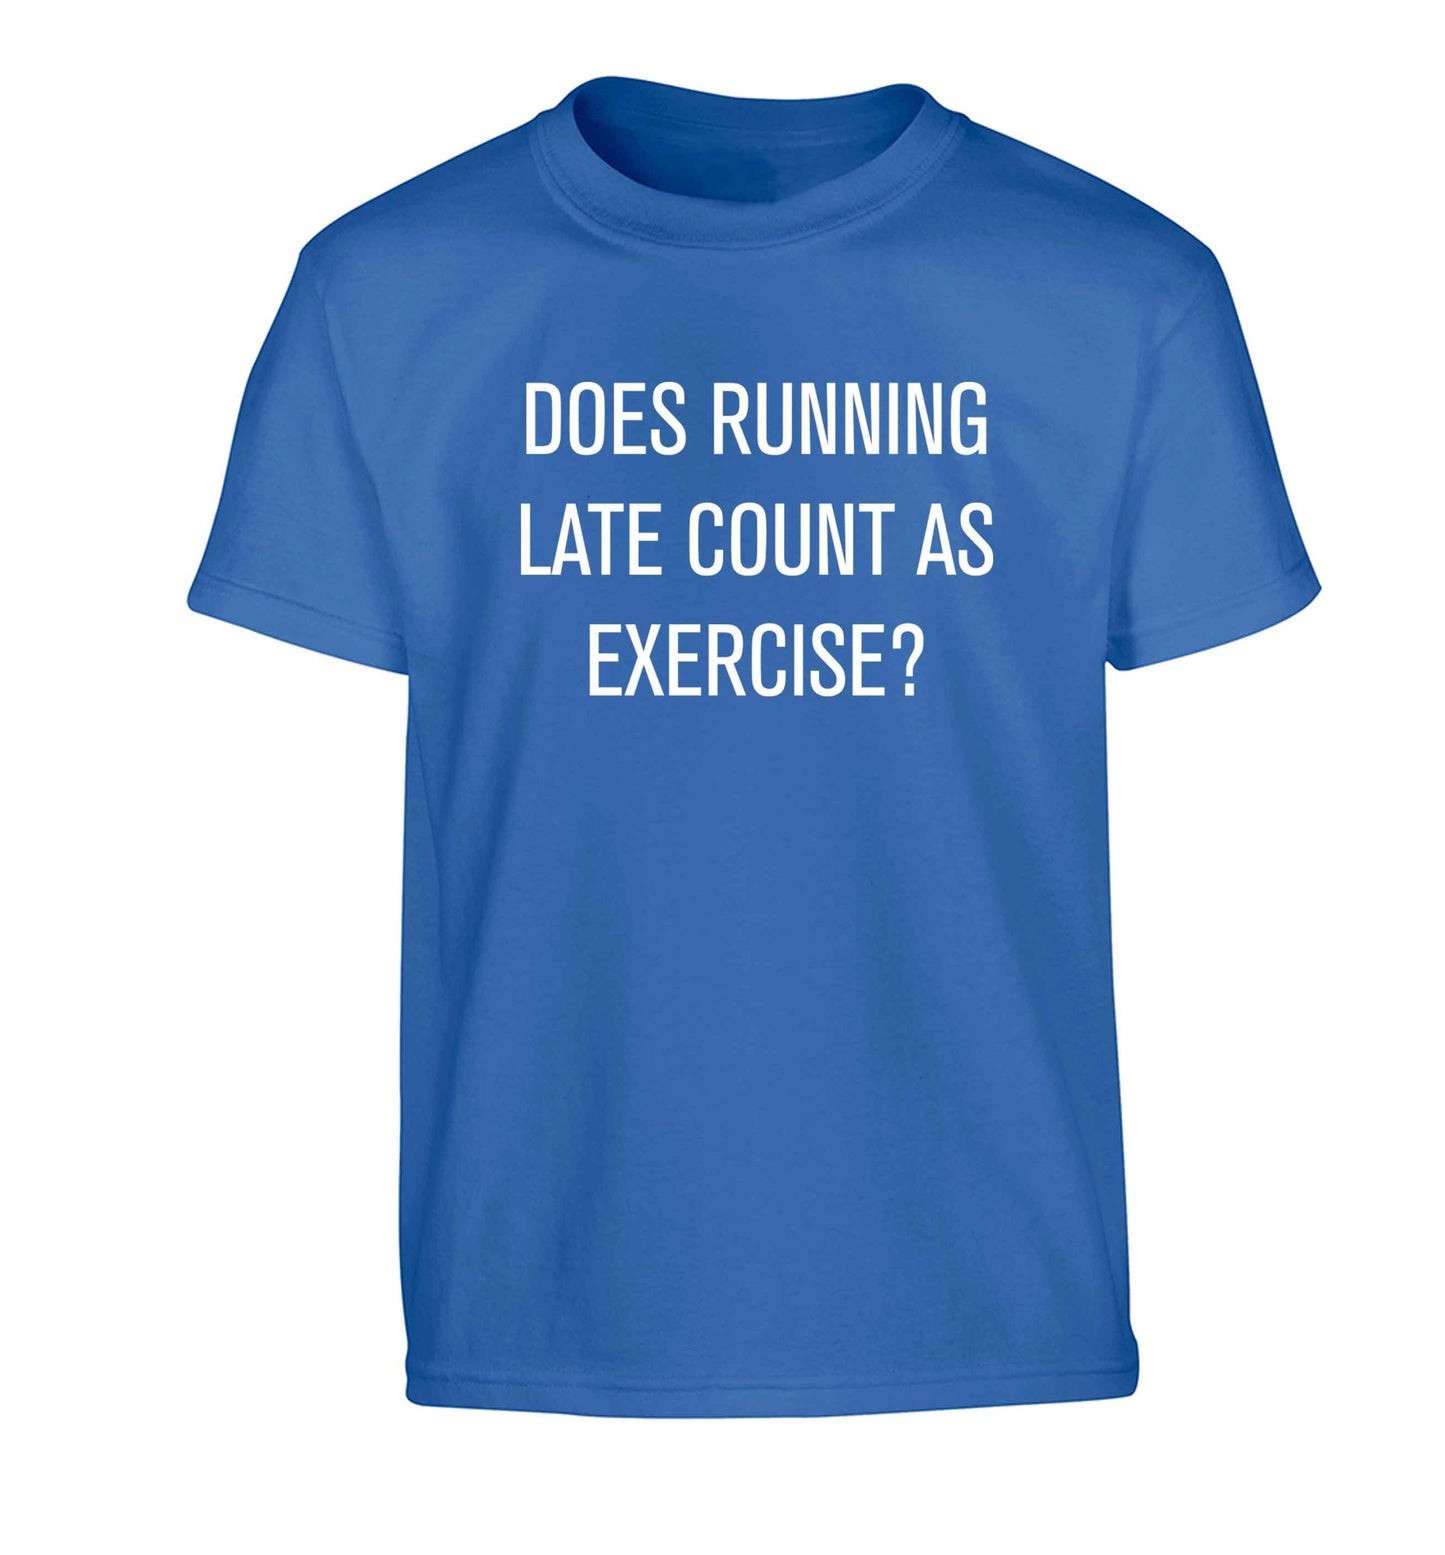 Does running late count as exercise? Children's blue Tshirt 12-13 Years